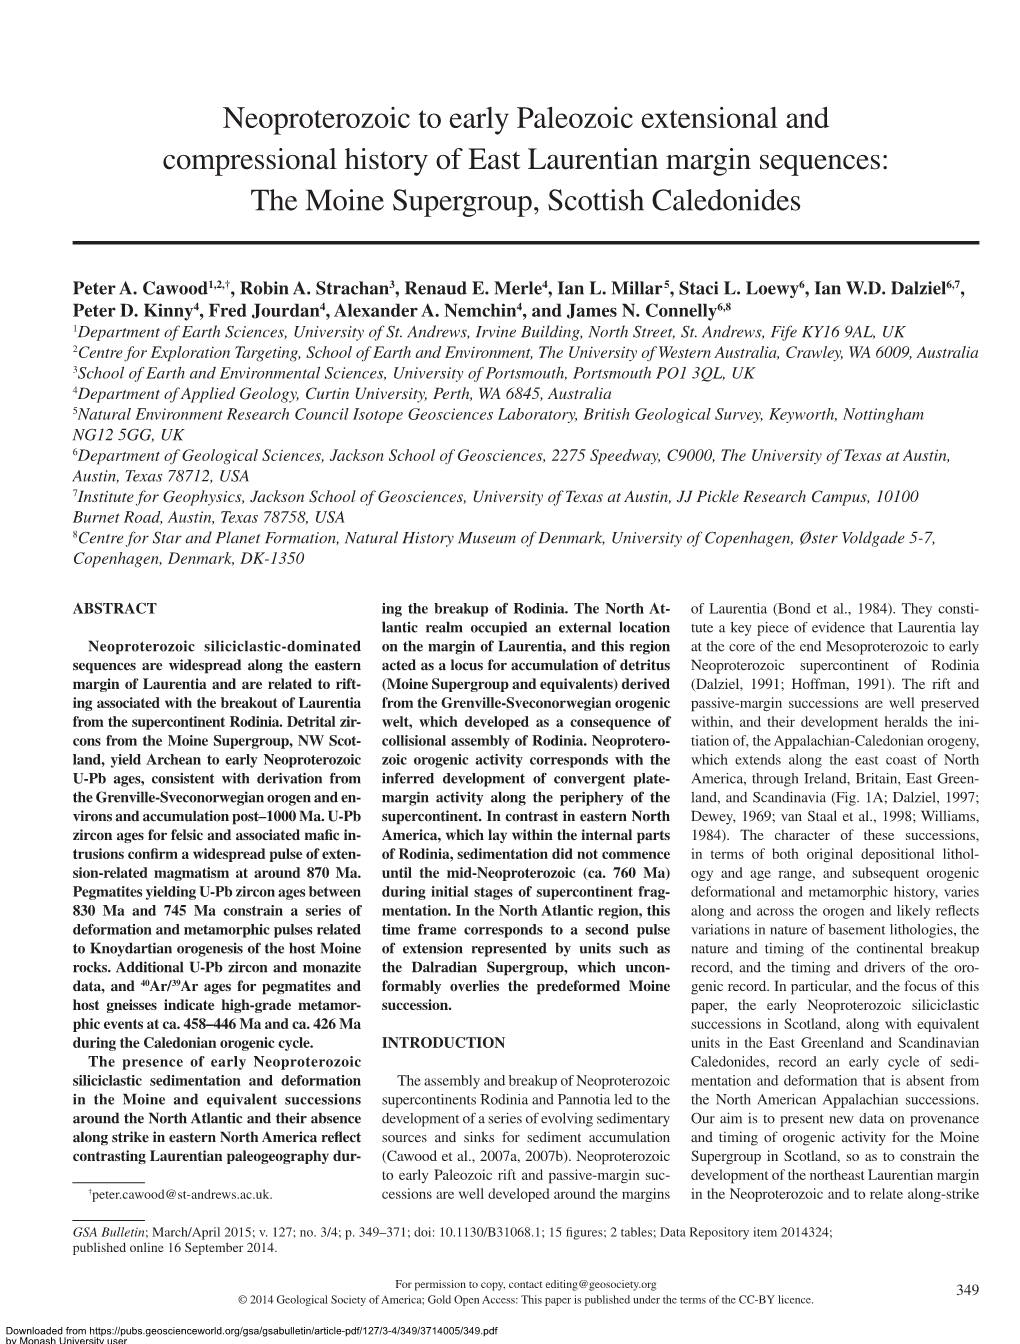 Neoproterozoic to Early Paleozoic Extensional and Compressional History of East Laurentian Margin Sequences: the Moine Supergroup, Scottish Caledonides